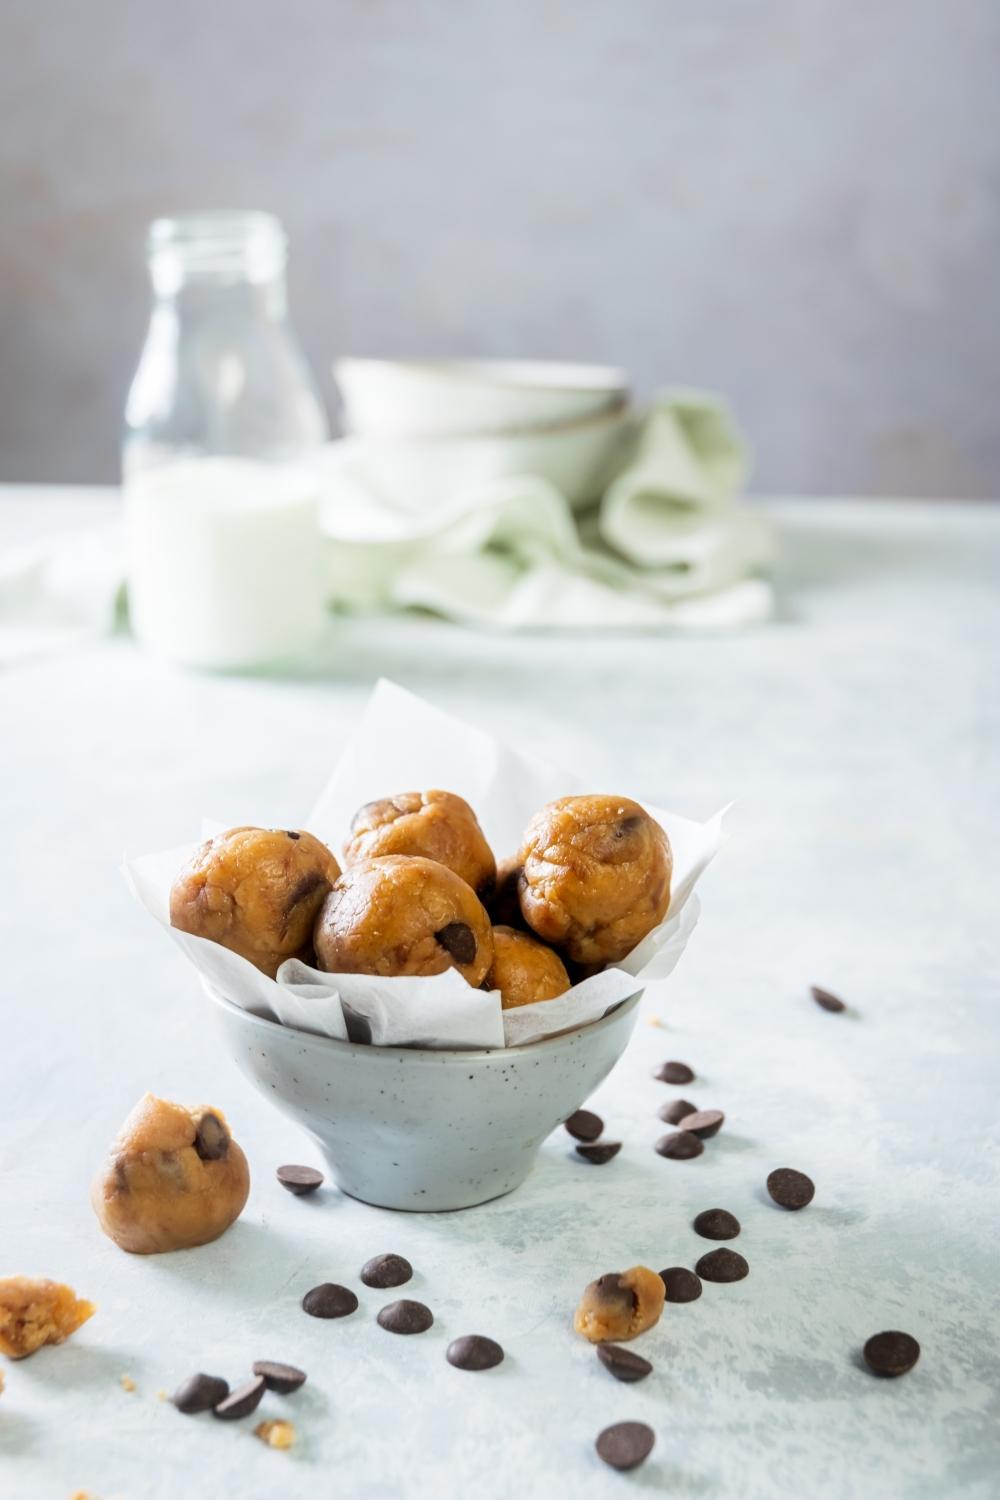 A bowl filled with edible cookie dough balls in it.